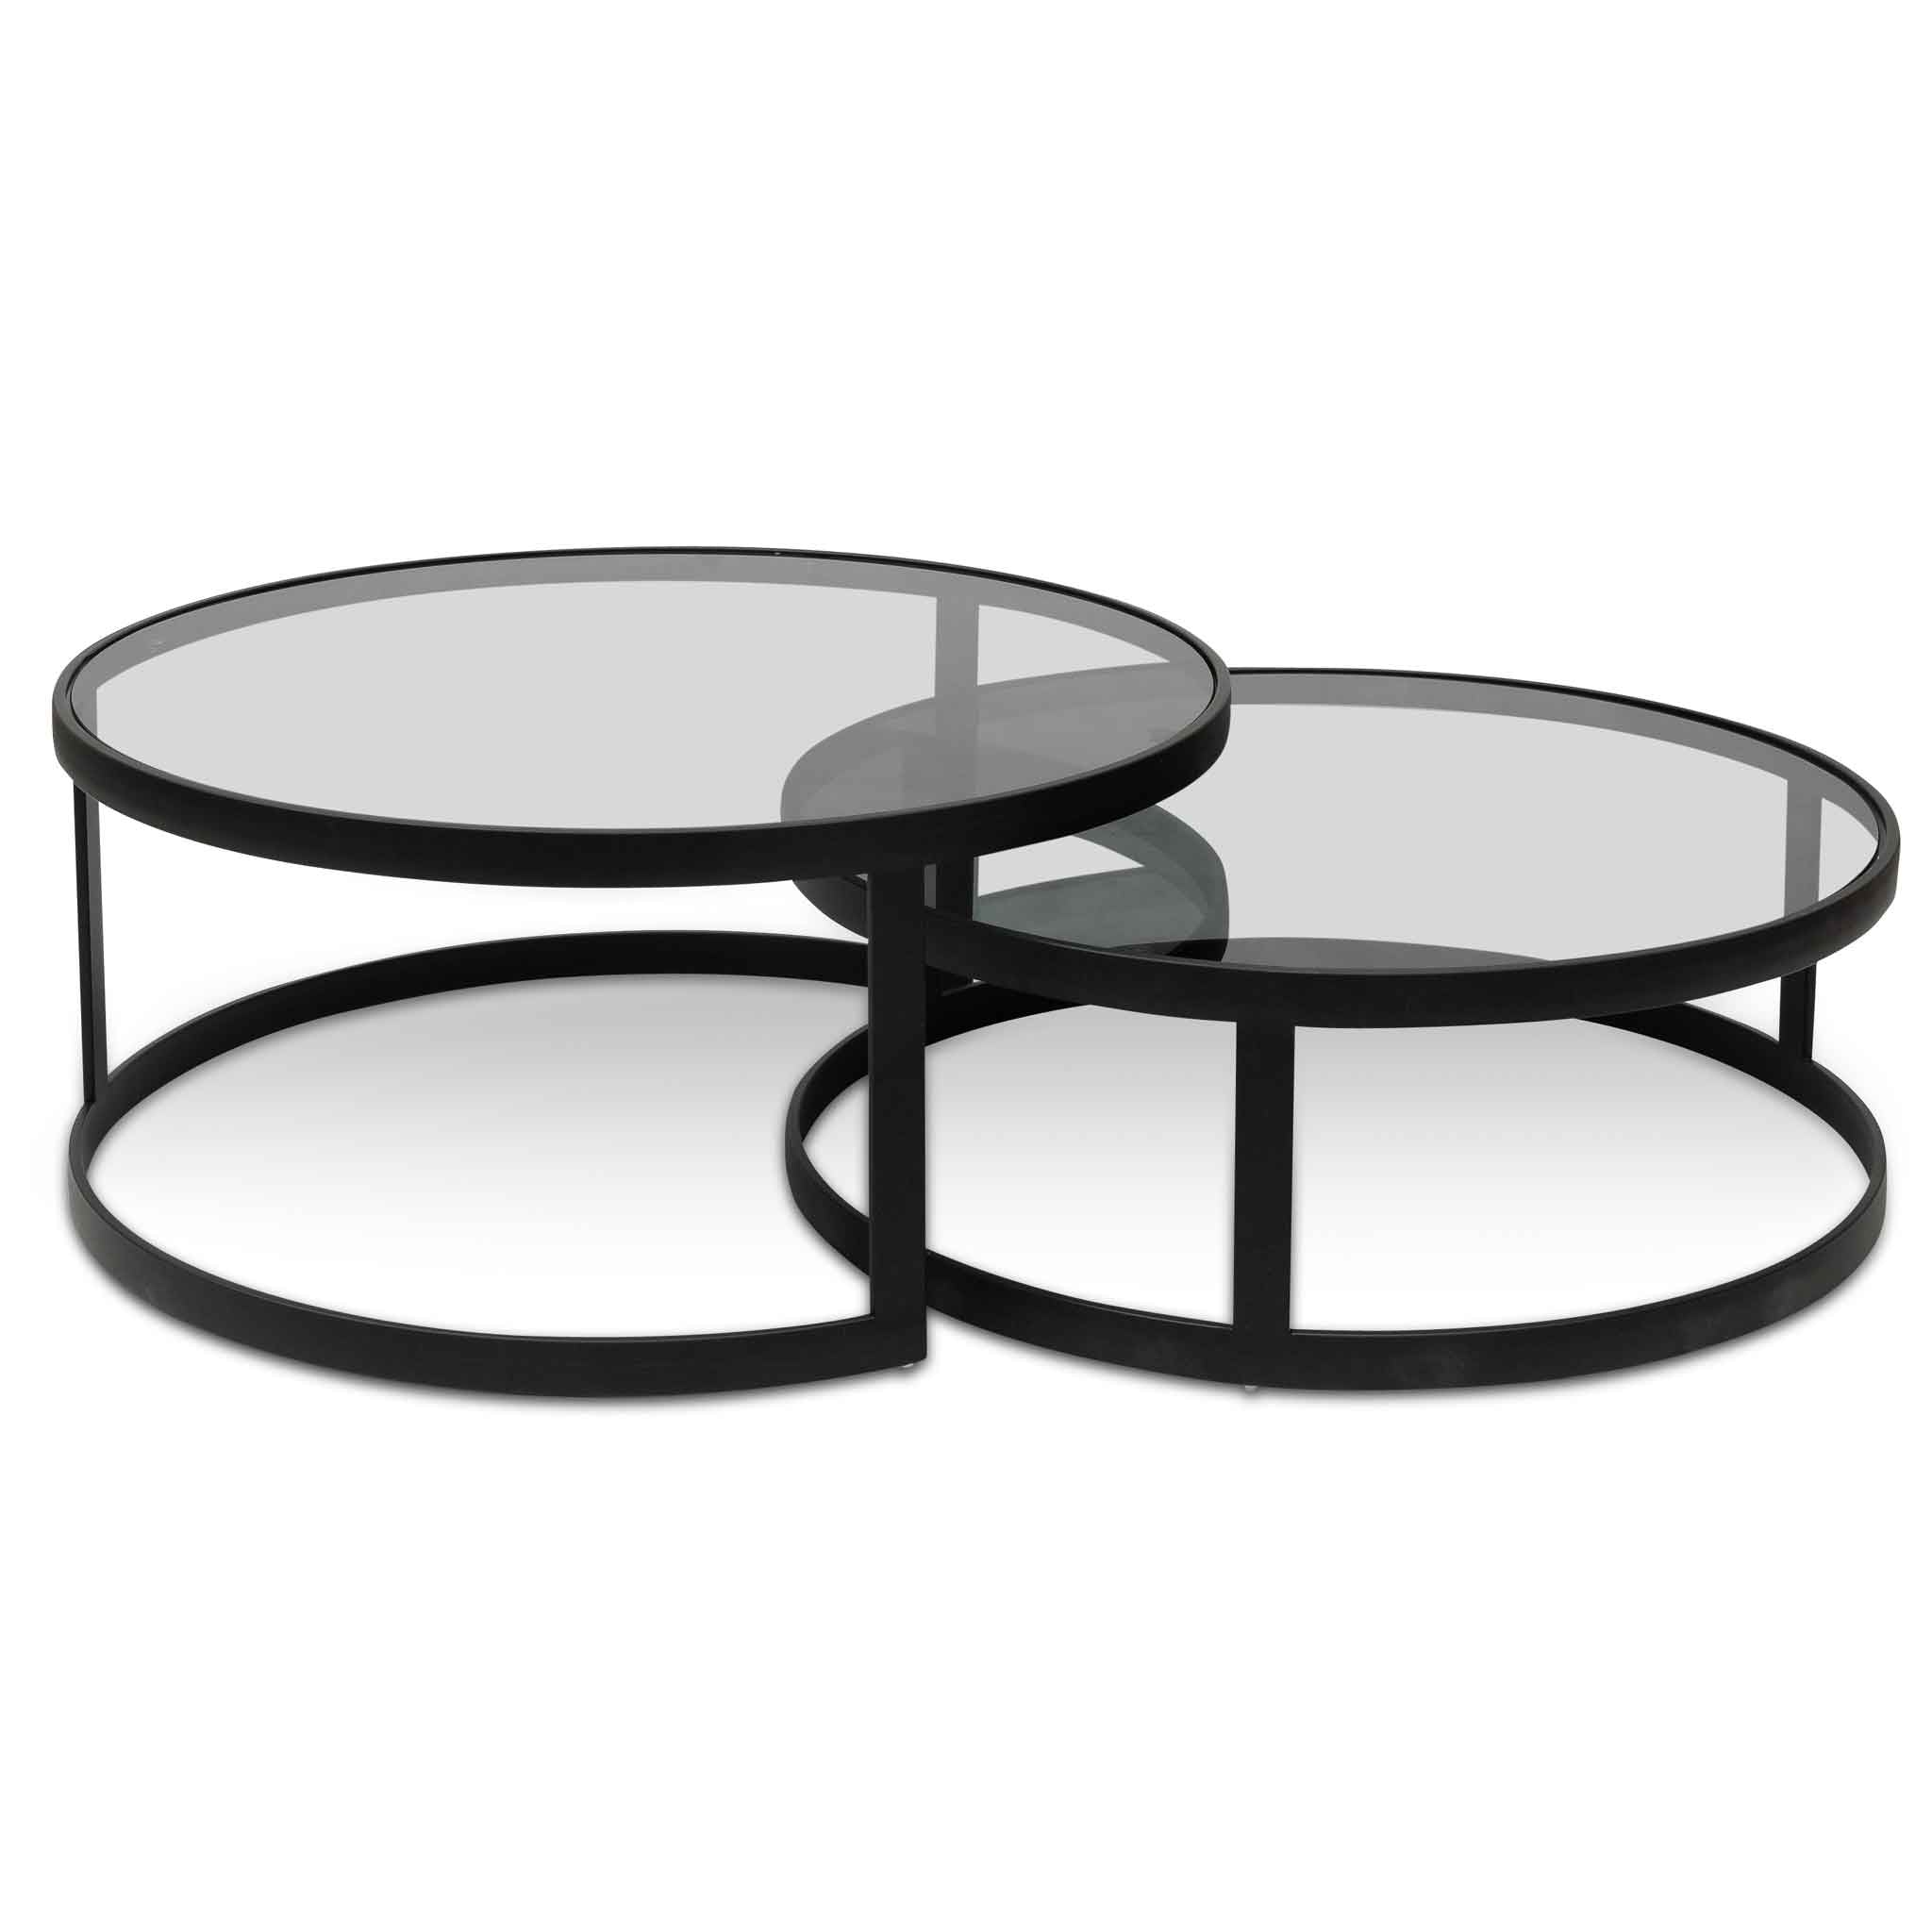 Nested Grey Glass Coffee Table - Black Base_1